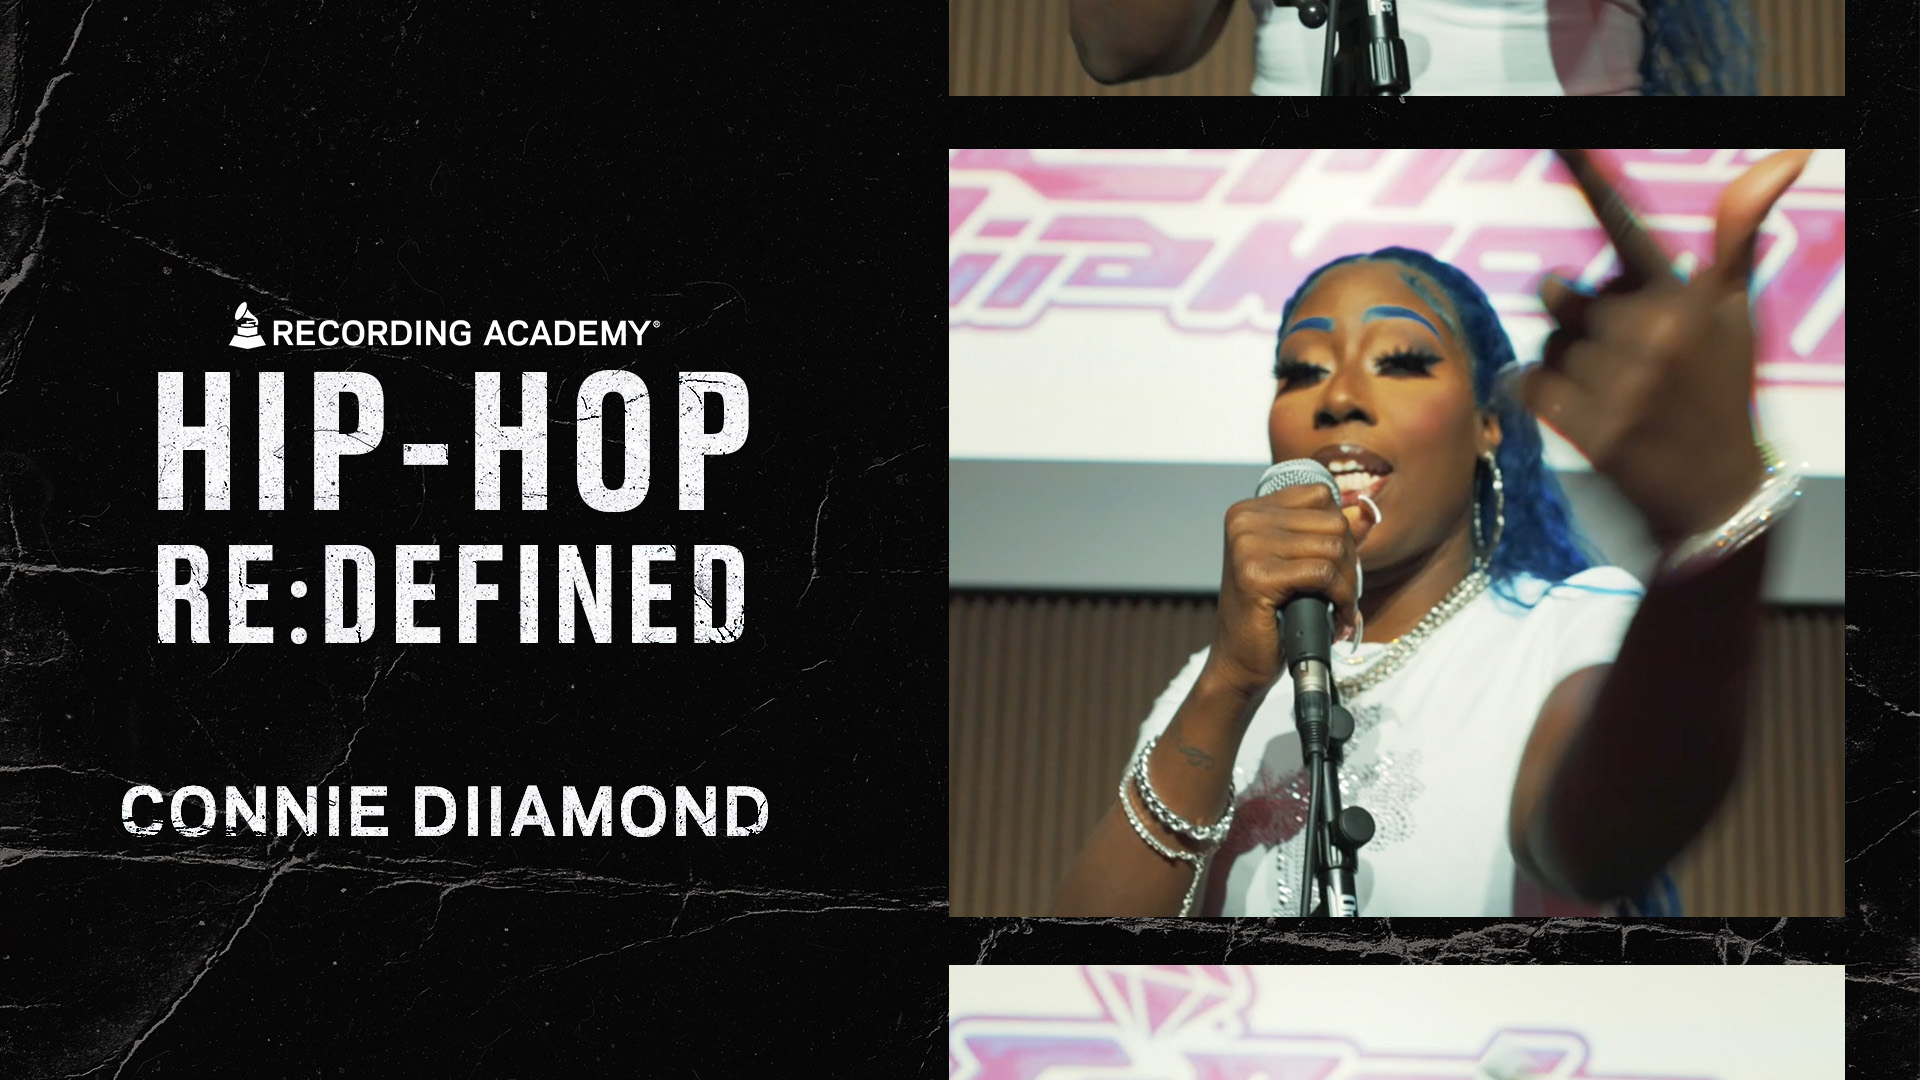 Watch Connie Diiamond Channel Remy Ma's "Conceited" Energy In This Fierce Cover | Hip-Hop Re:Defined